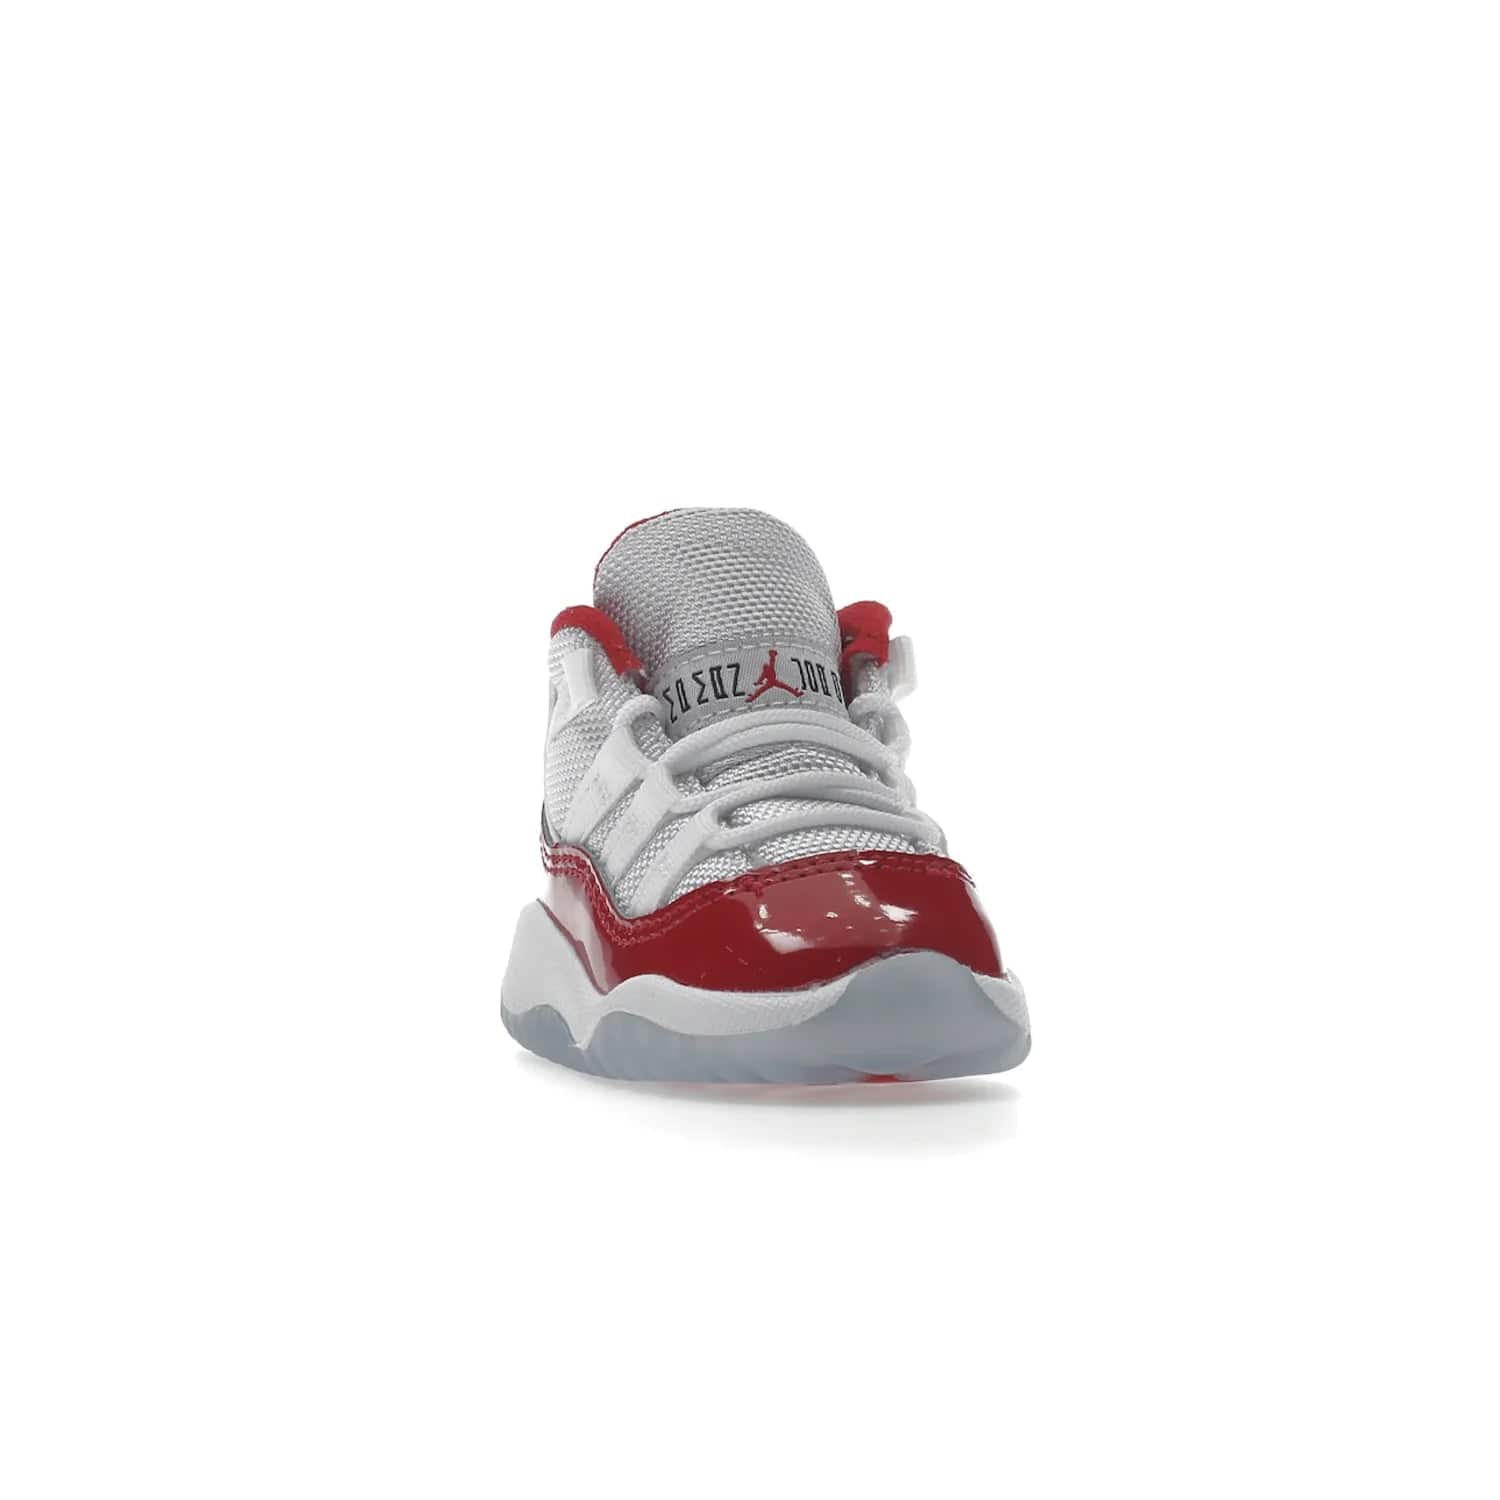 Jordan 11 Retro Cherry (2022) (TD) - Image 8 - Only at www.BallersClubKickz.com - Timeless classic. Air Jordan 11 Retro Cherry 2022 TD combines mesh, leather & suede for a unique look. White upper with varsity red suede. Jumpman logo on collar & tongue. Available Dec 10th, priced at $80.